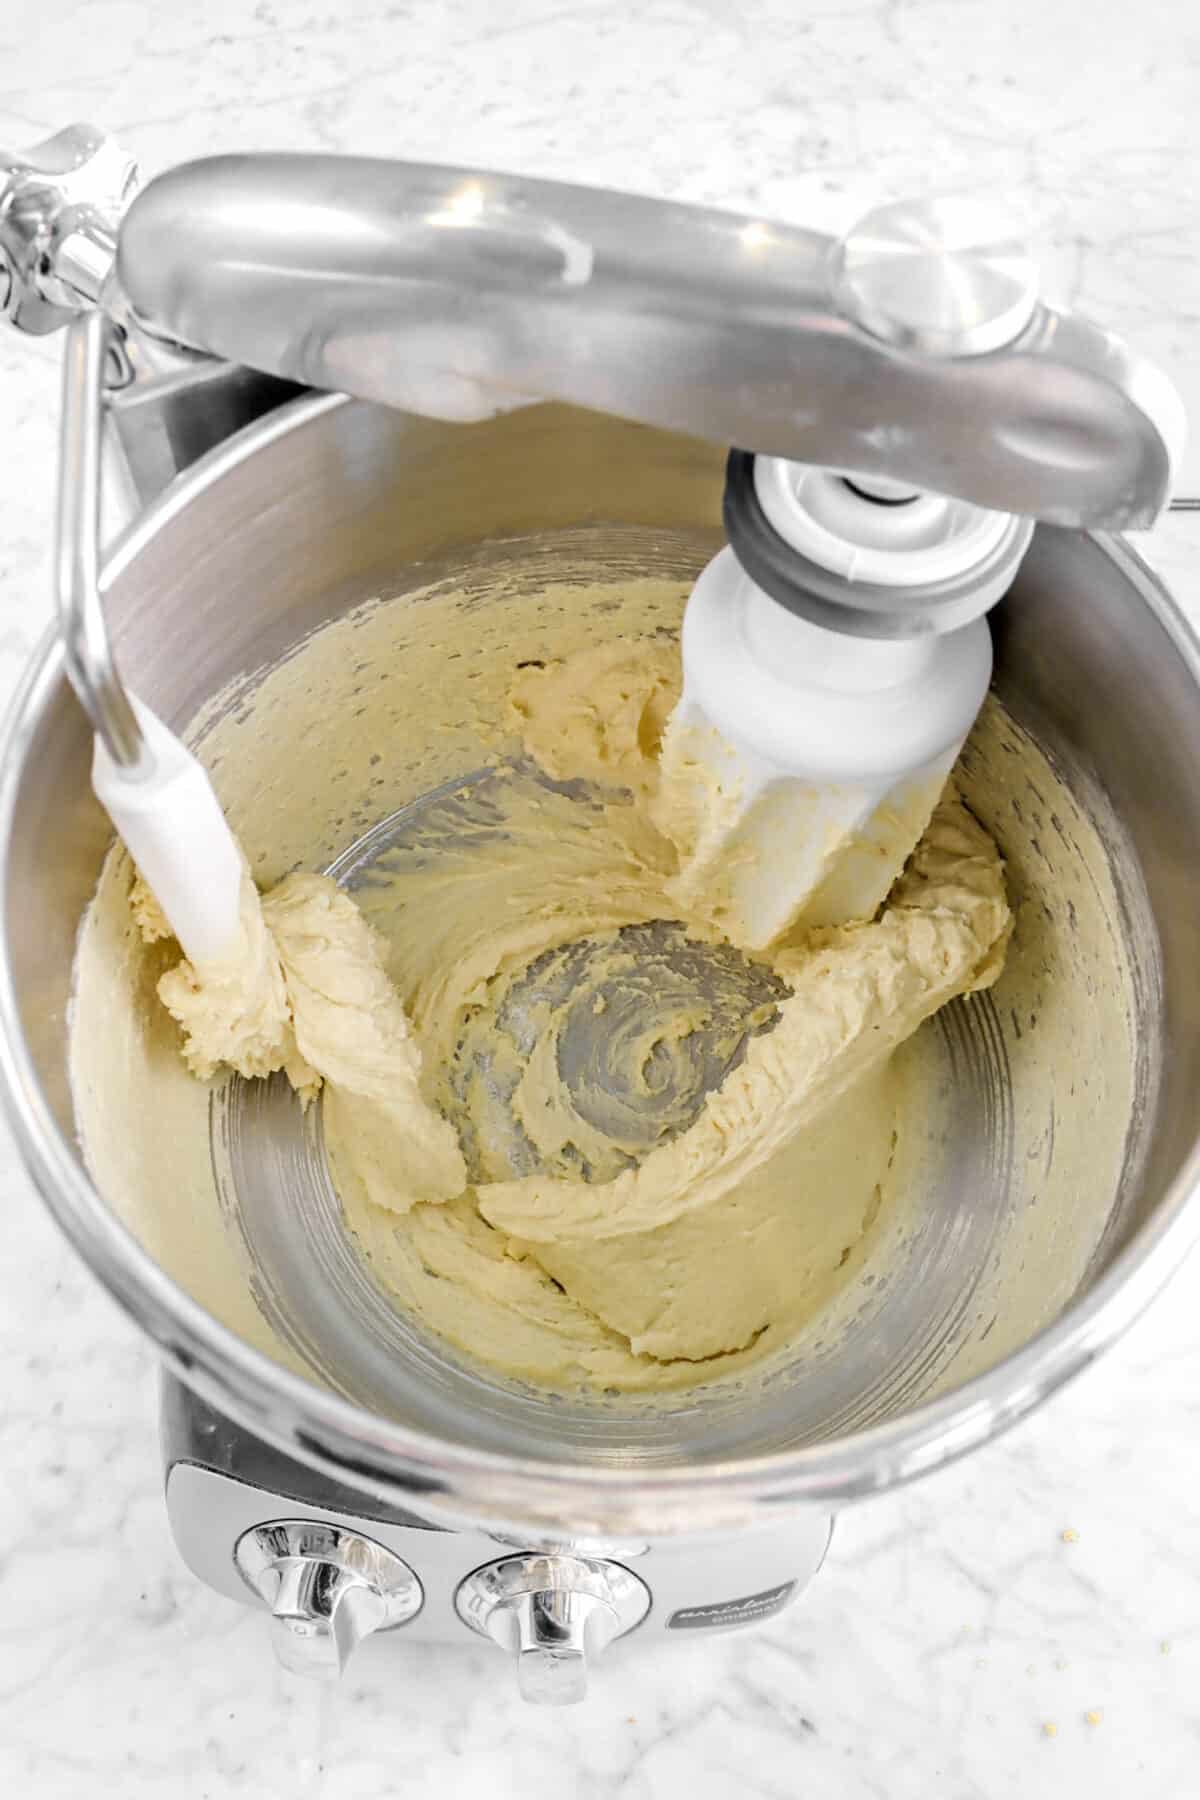 dry ingredients mixed into butter mixture